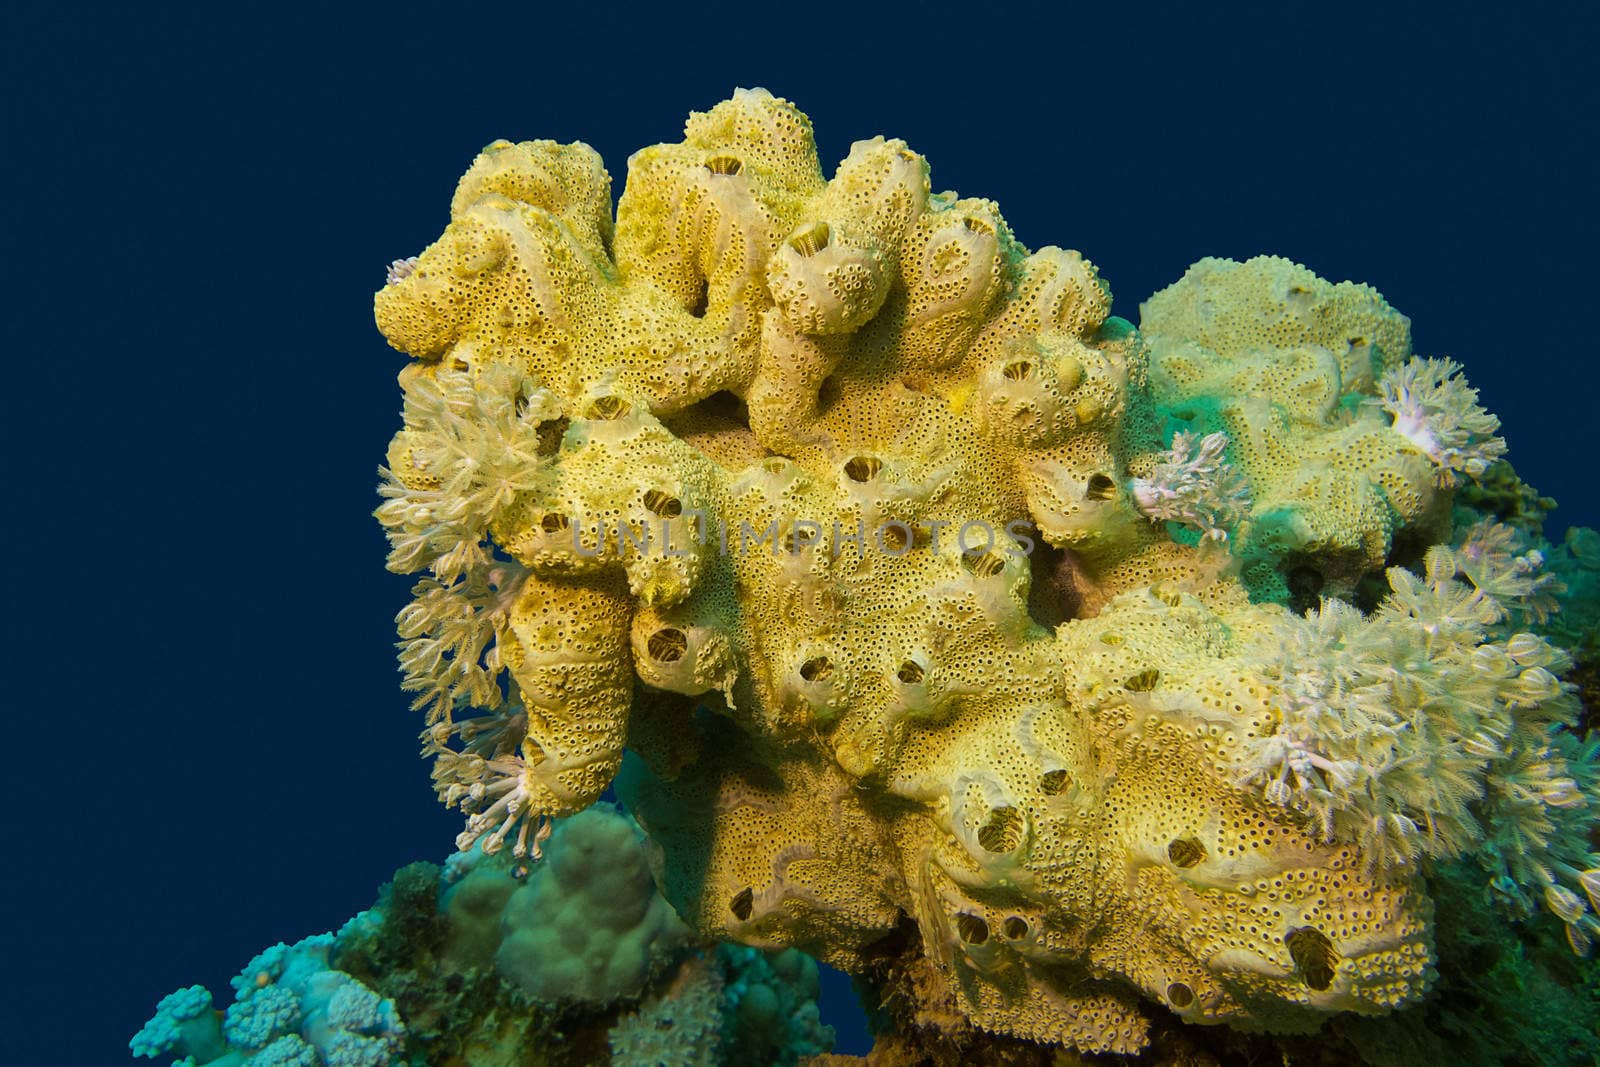 coral reef with great yellow sea sponge at the bottom of tropical sea on blue water background by mychadre77